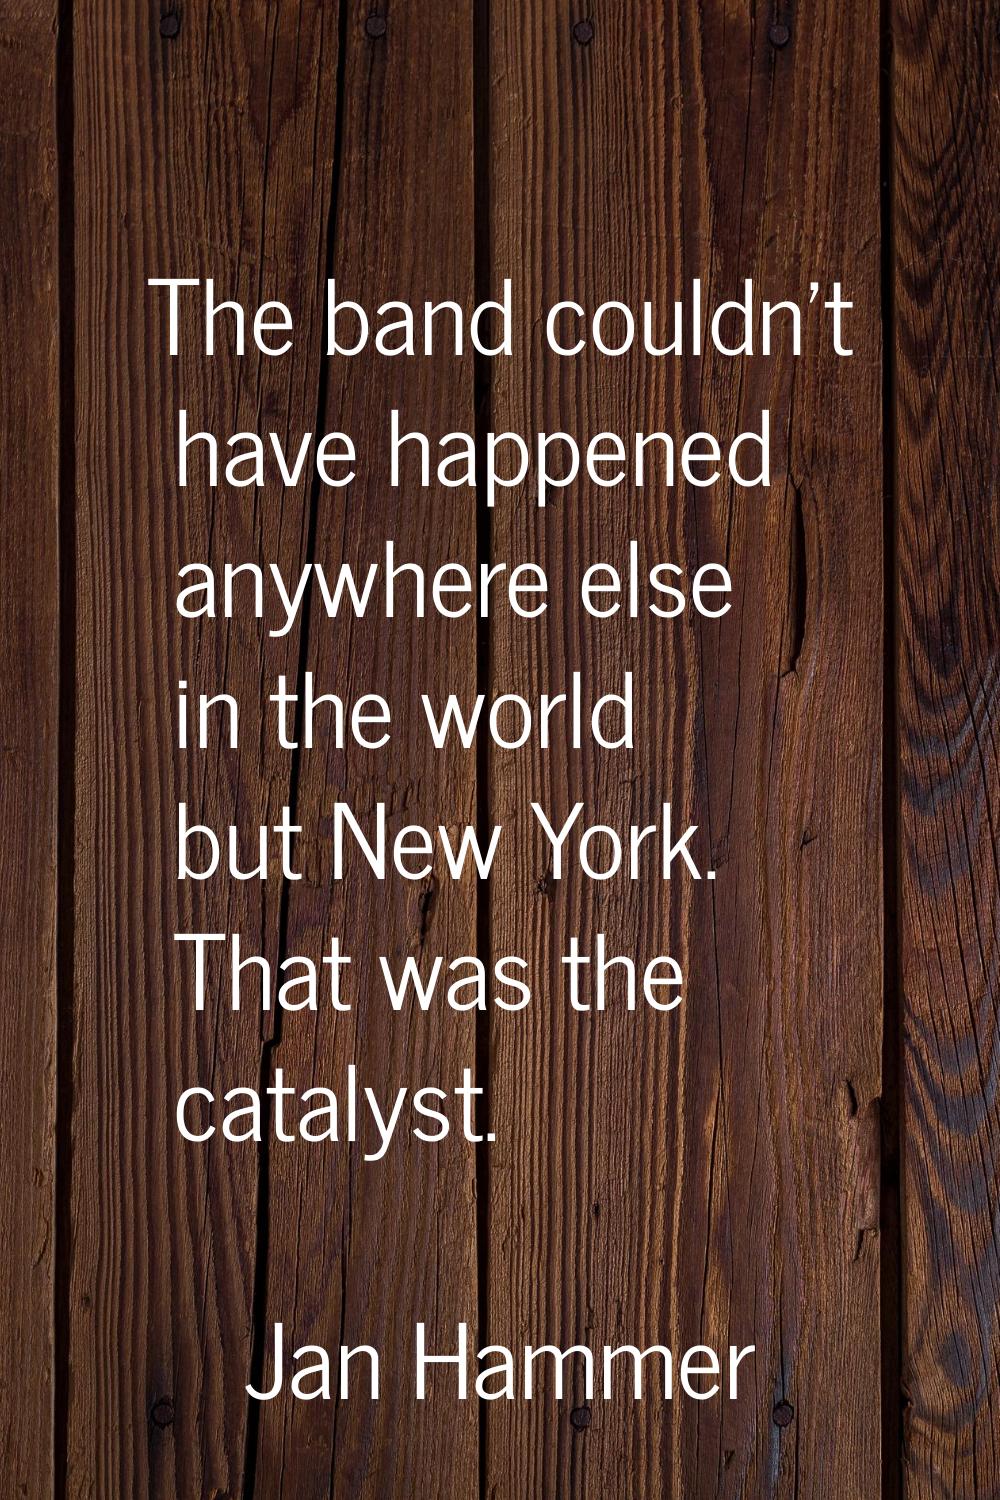 The band couldn't have happened anywhere else in the world but New York. That was the catalyst.